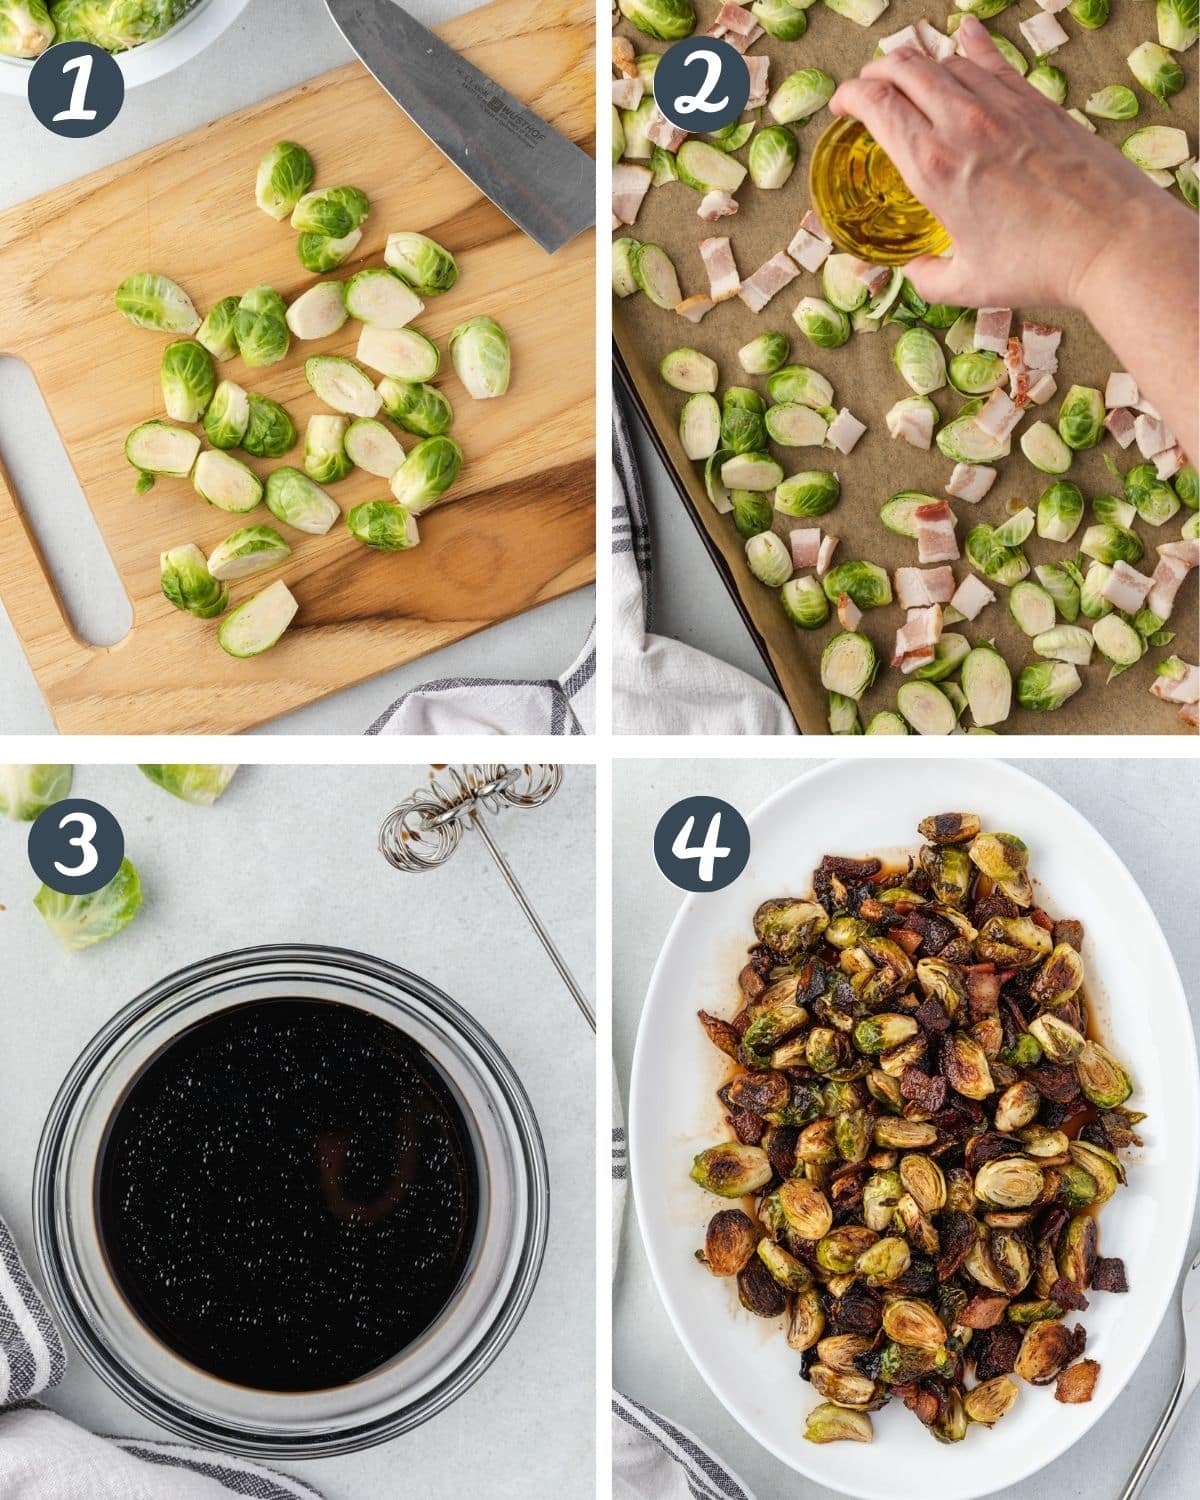 4 steps to make the recipe: Trimming brussels, pouring oil to roast, balsamic dressing, and on a platter.